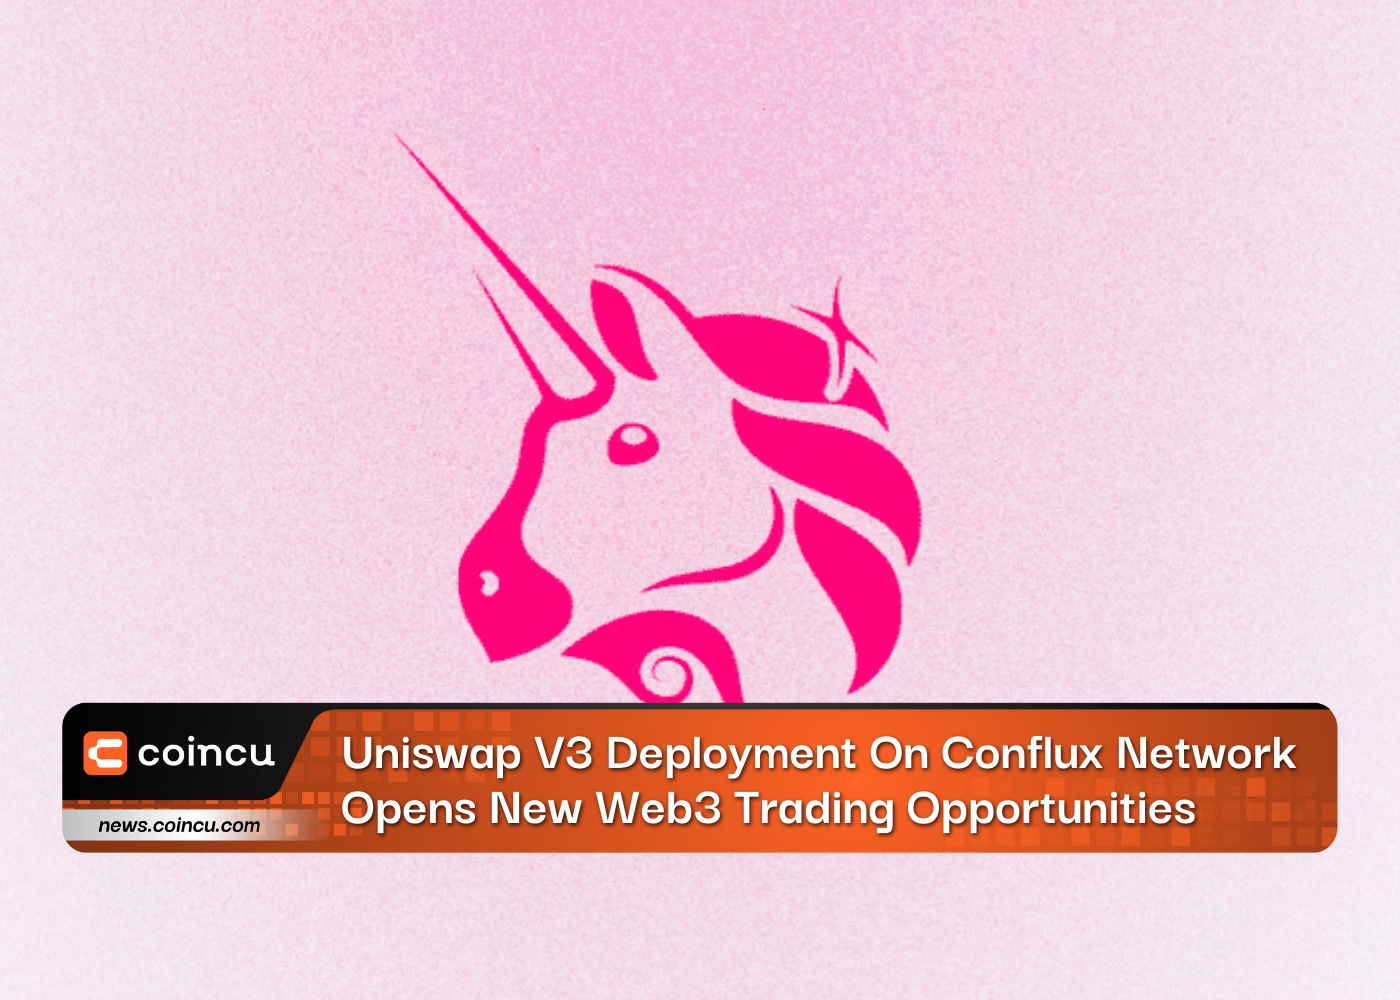 Uniswap V3 Deployment On Conflux Network Opens New Web3 Trading Opportunities